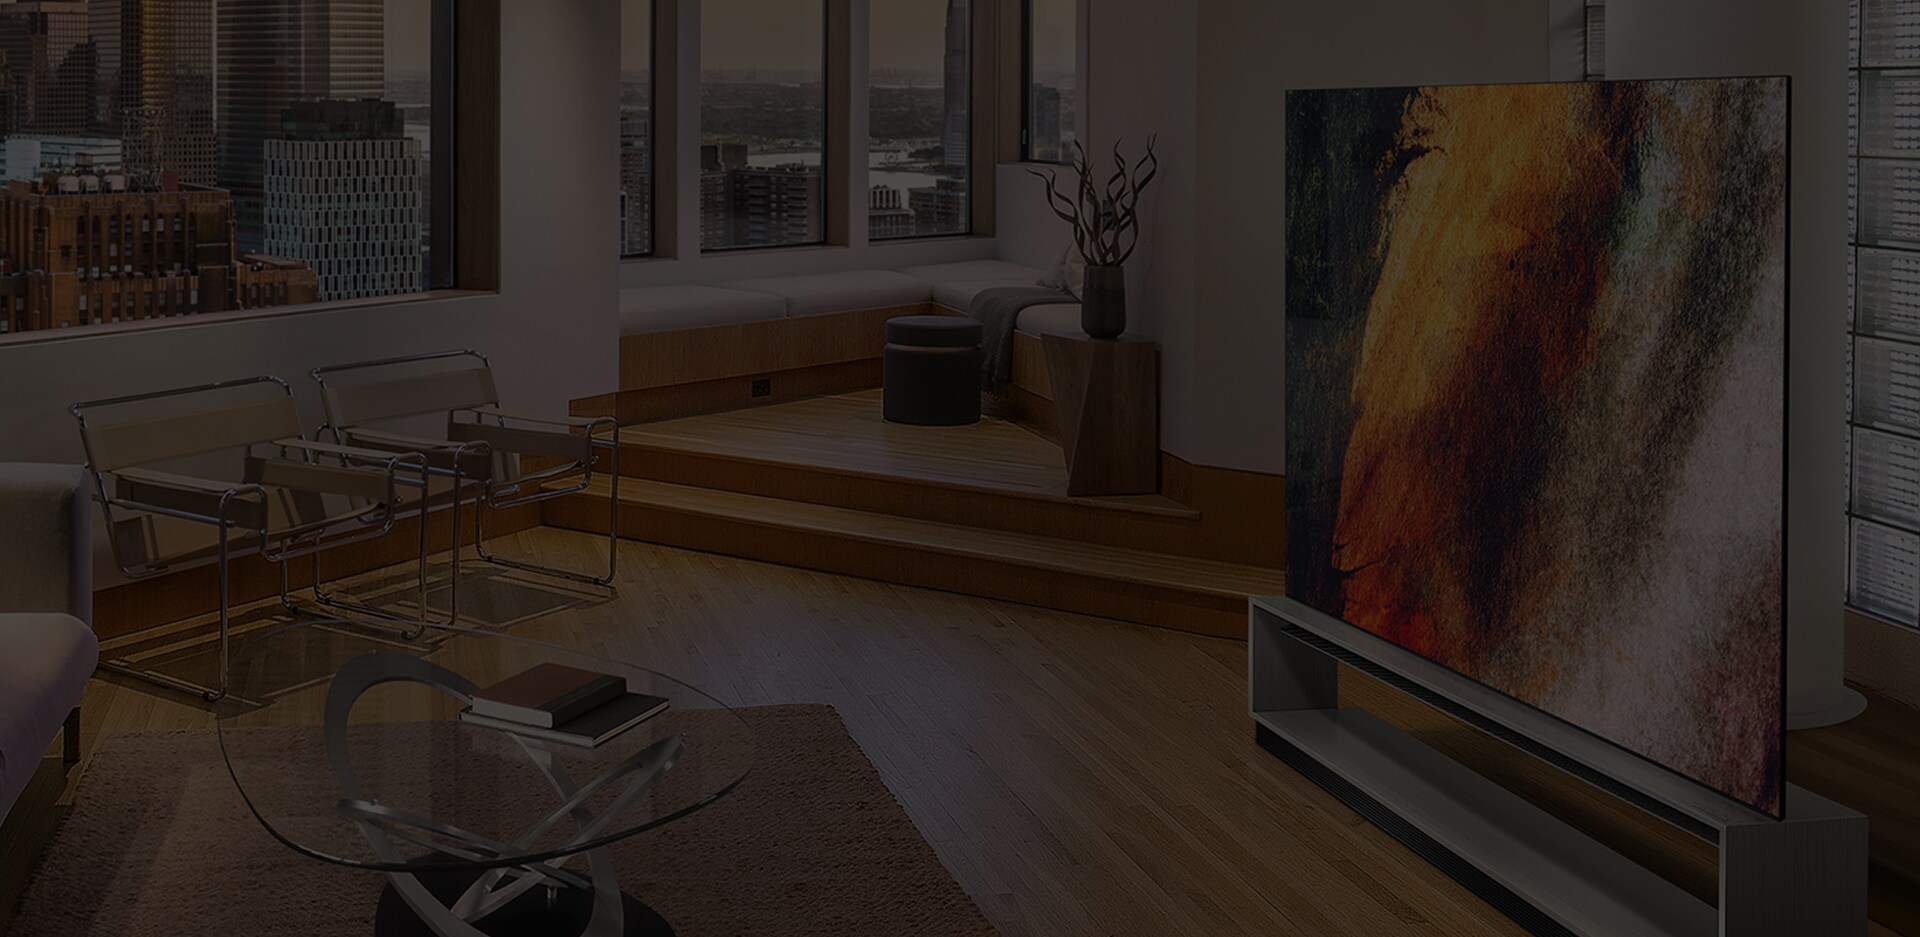 LG SIGNATURE OLED 8K TV is placed in the living room, decorated by Lignum Vitae wood.